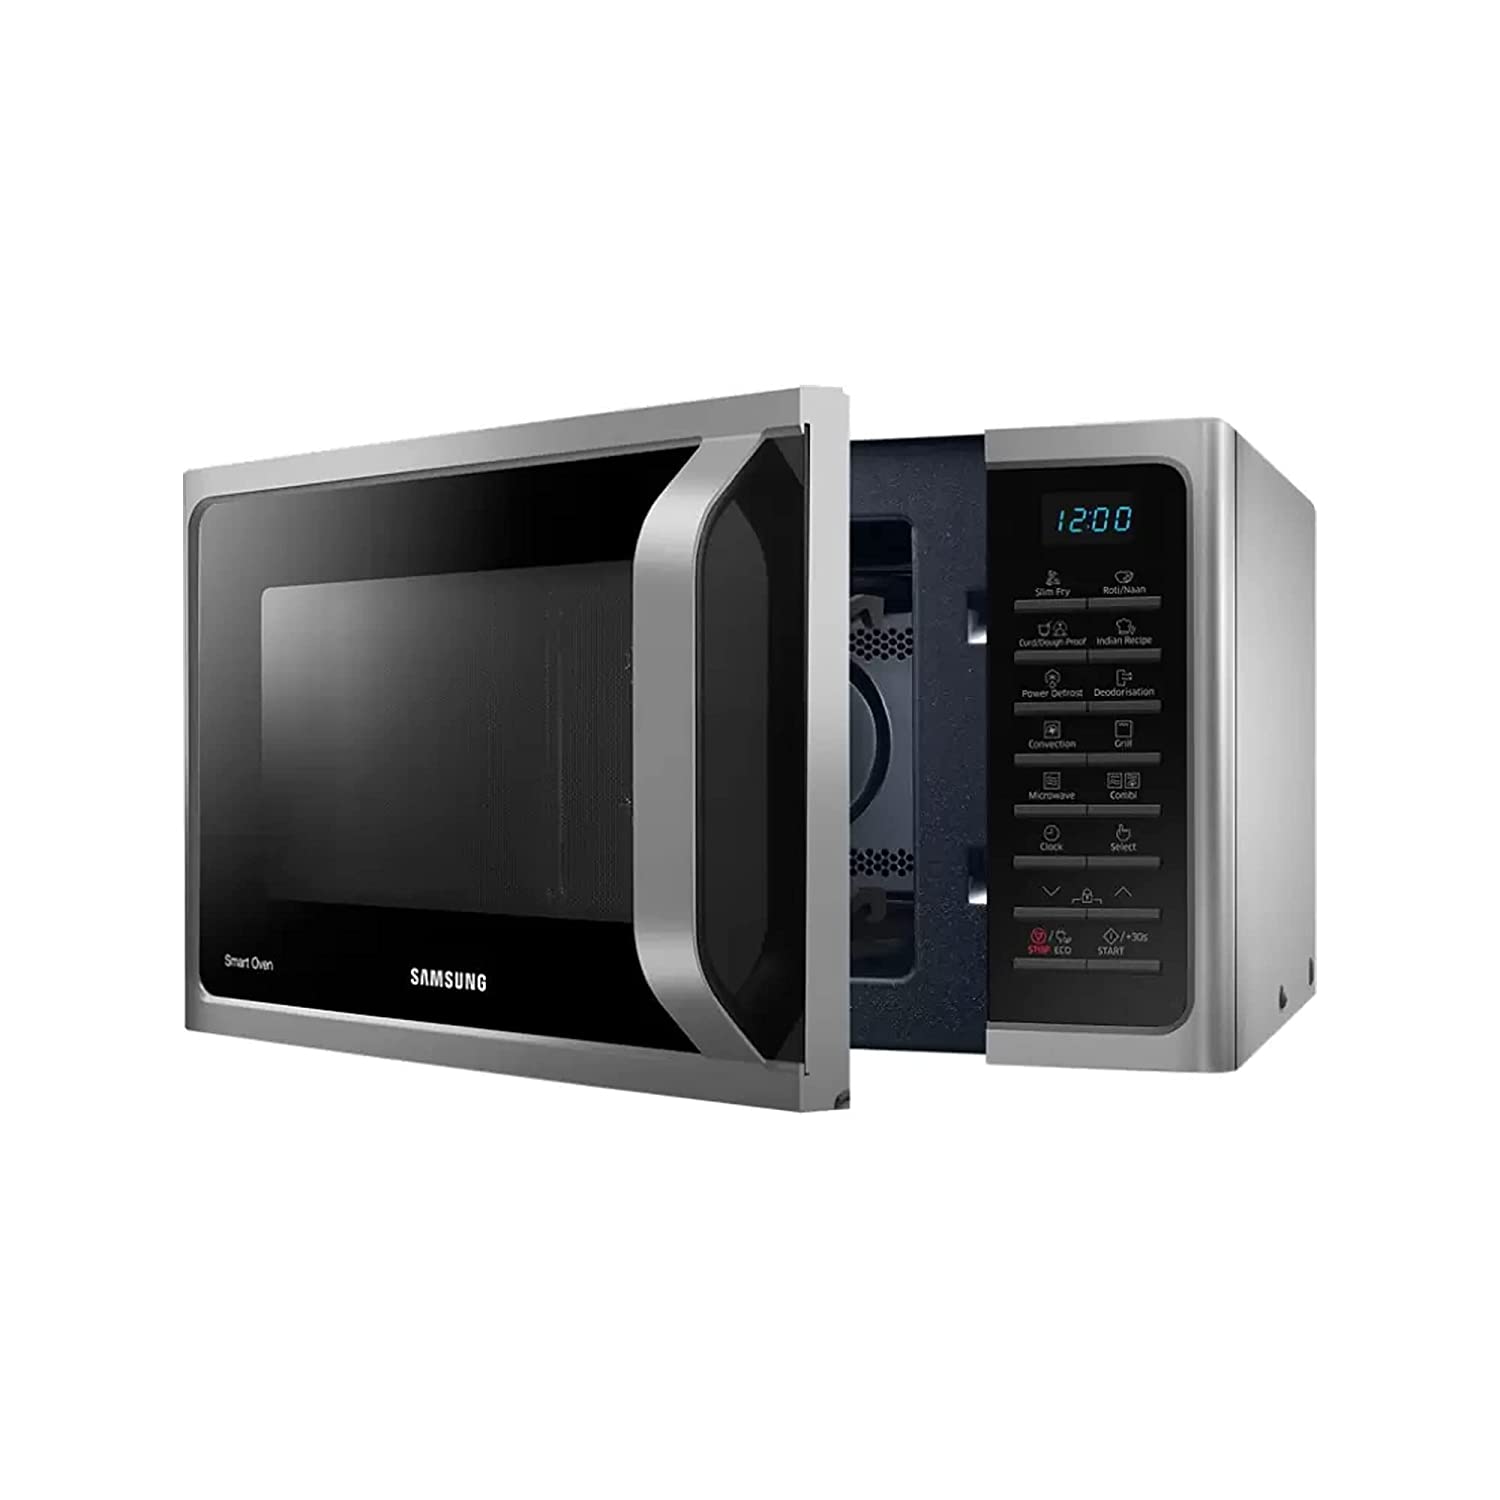 Samsung 28 L Convection Microwave Oven (MC28A5025VS/TL, Silver, slim fry)